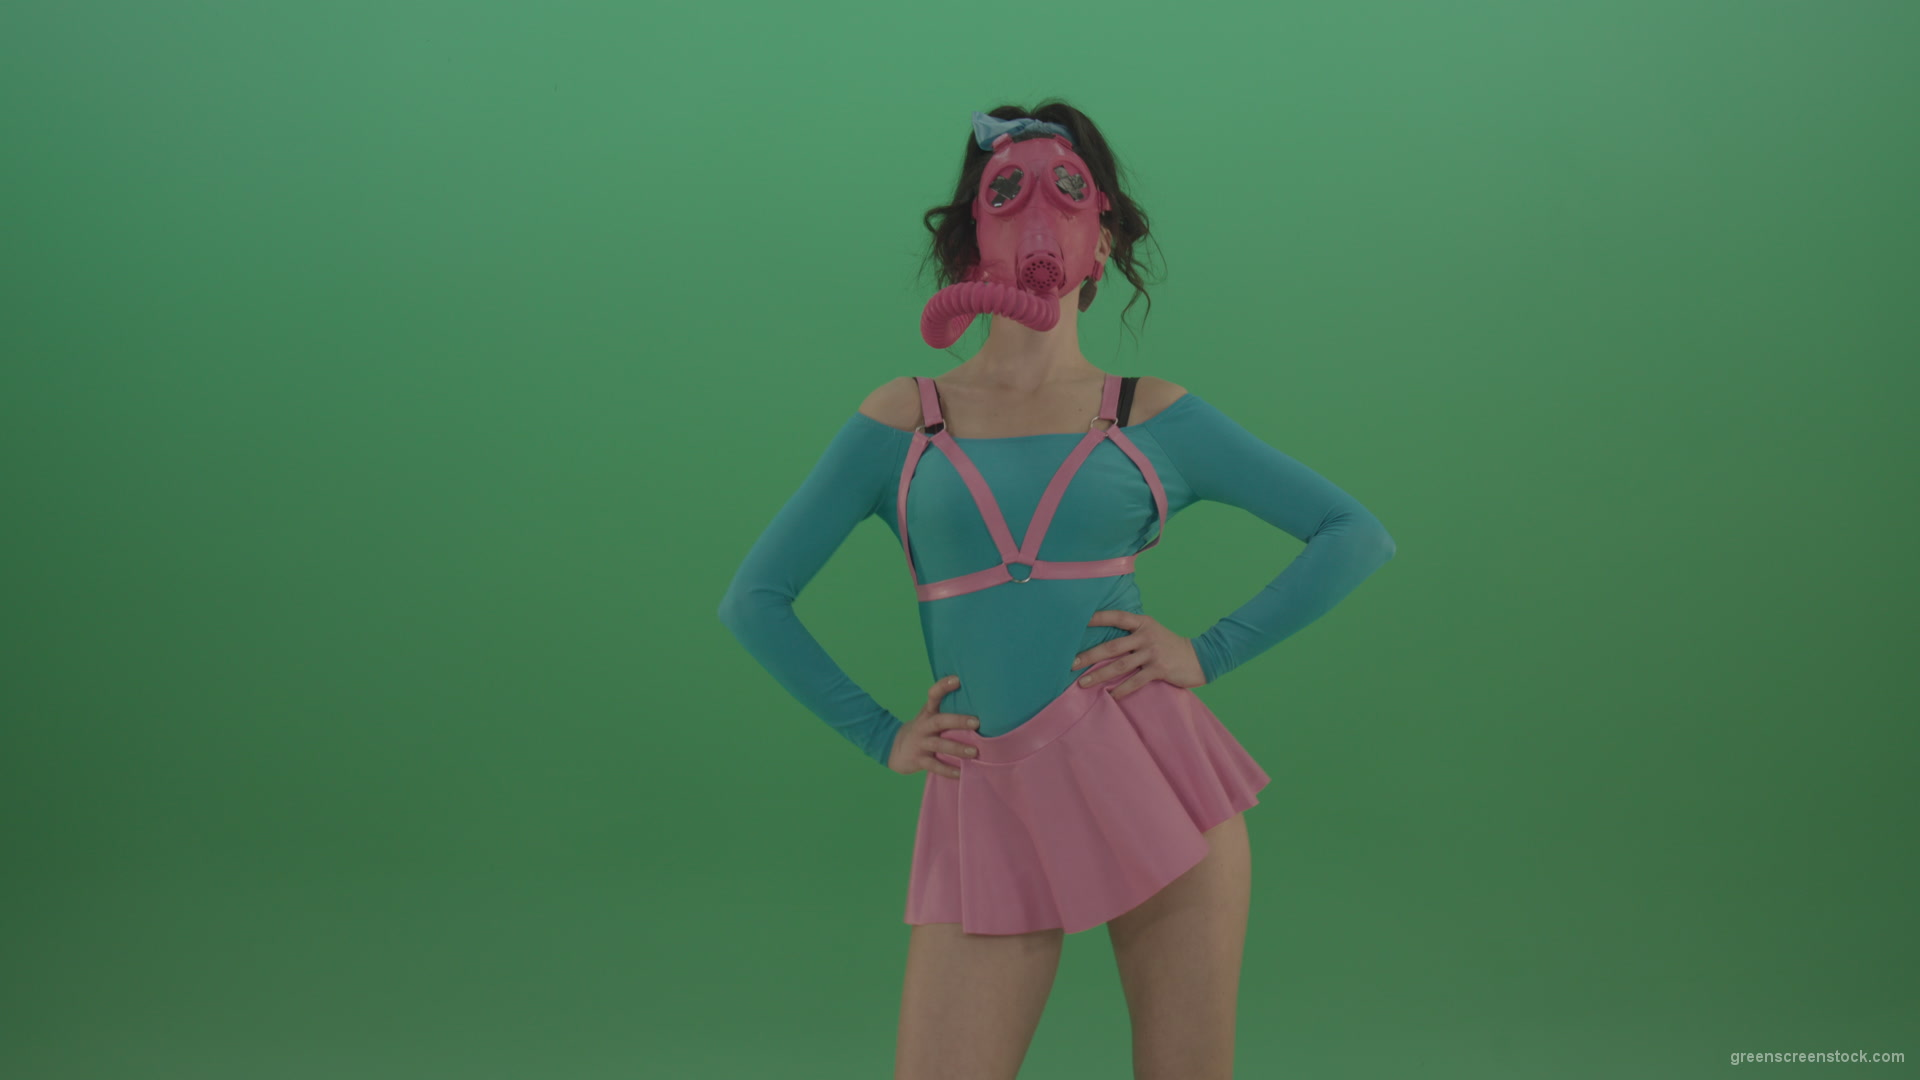 Beautiful-erotic-dance-from-a-woman-in-a-mask-in-a-pink-suit-on-green-background_008 Green Screen Stock